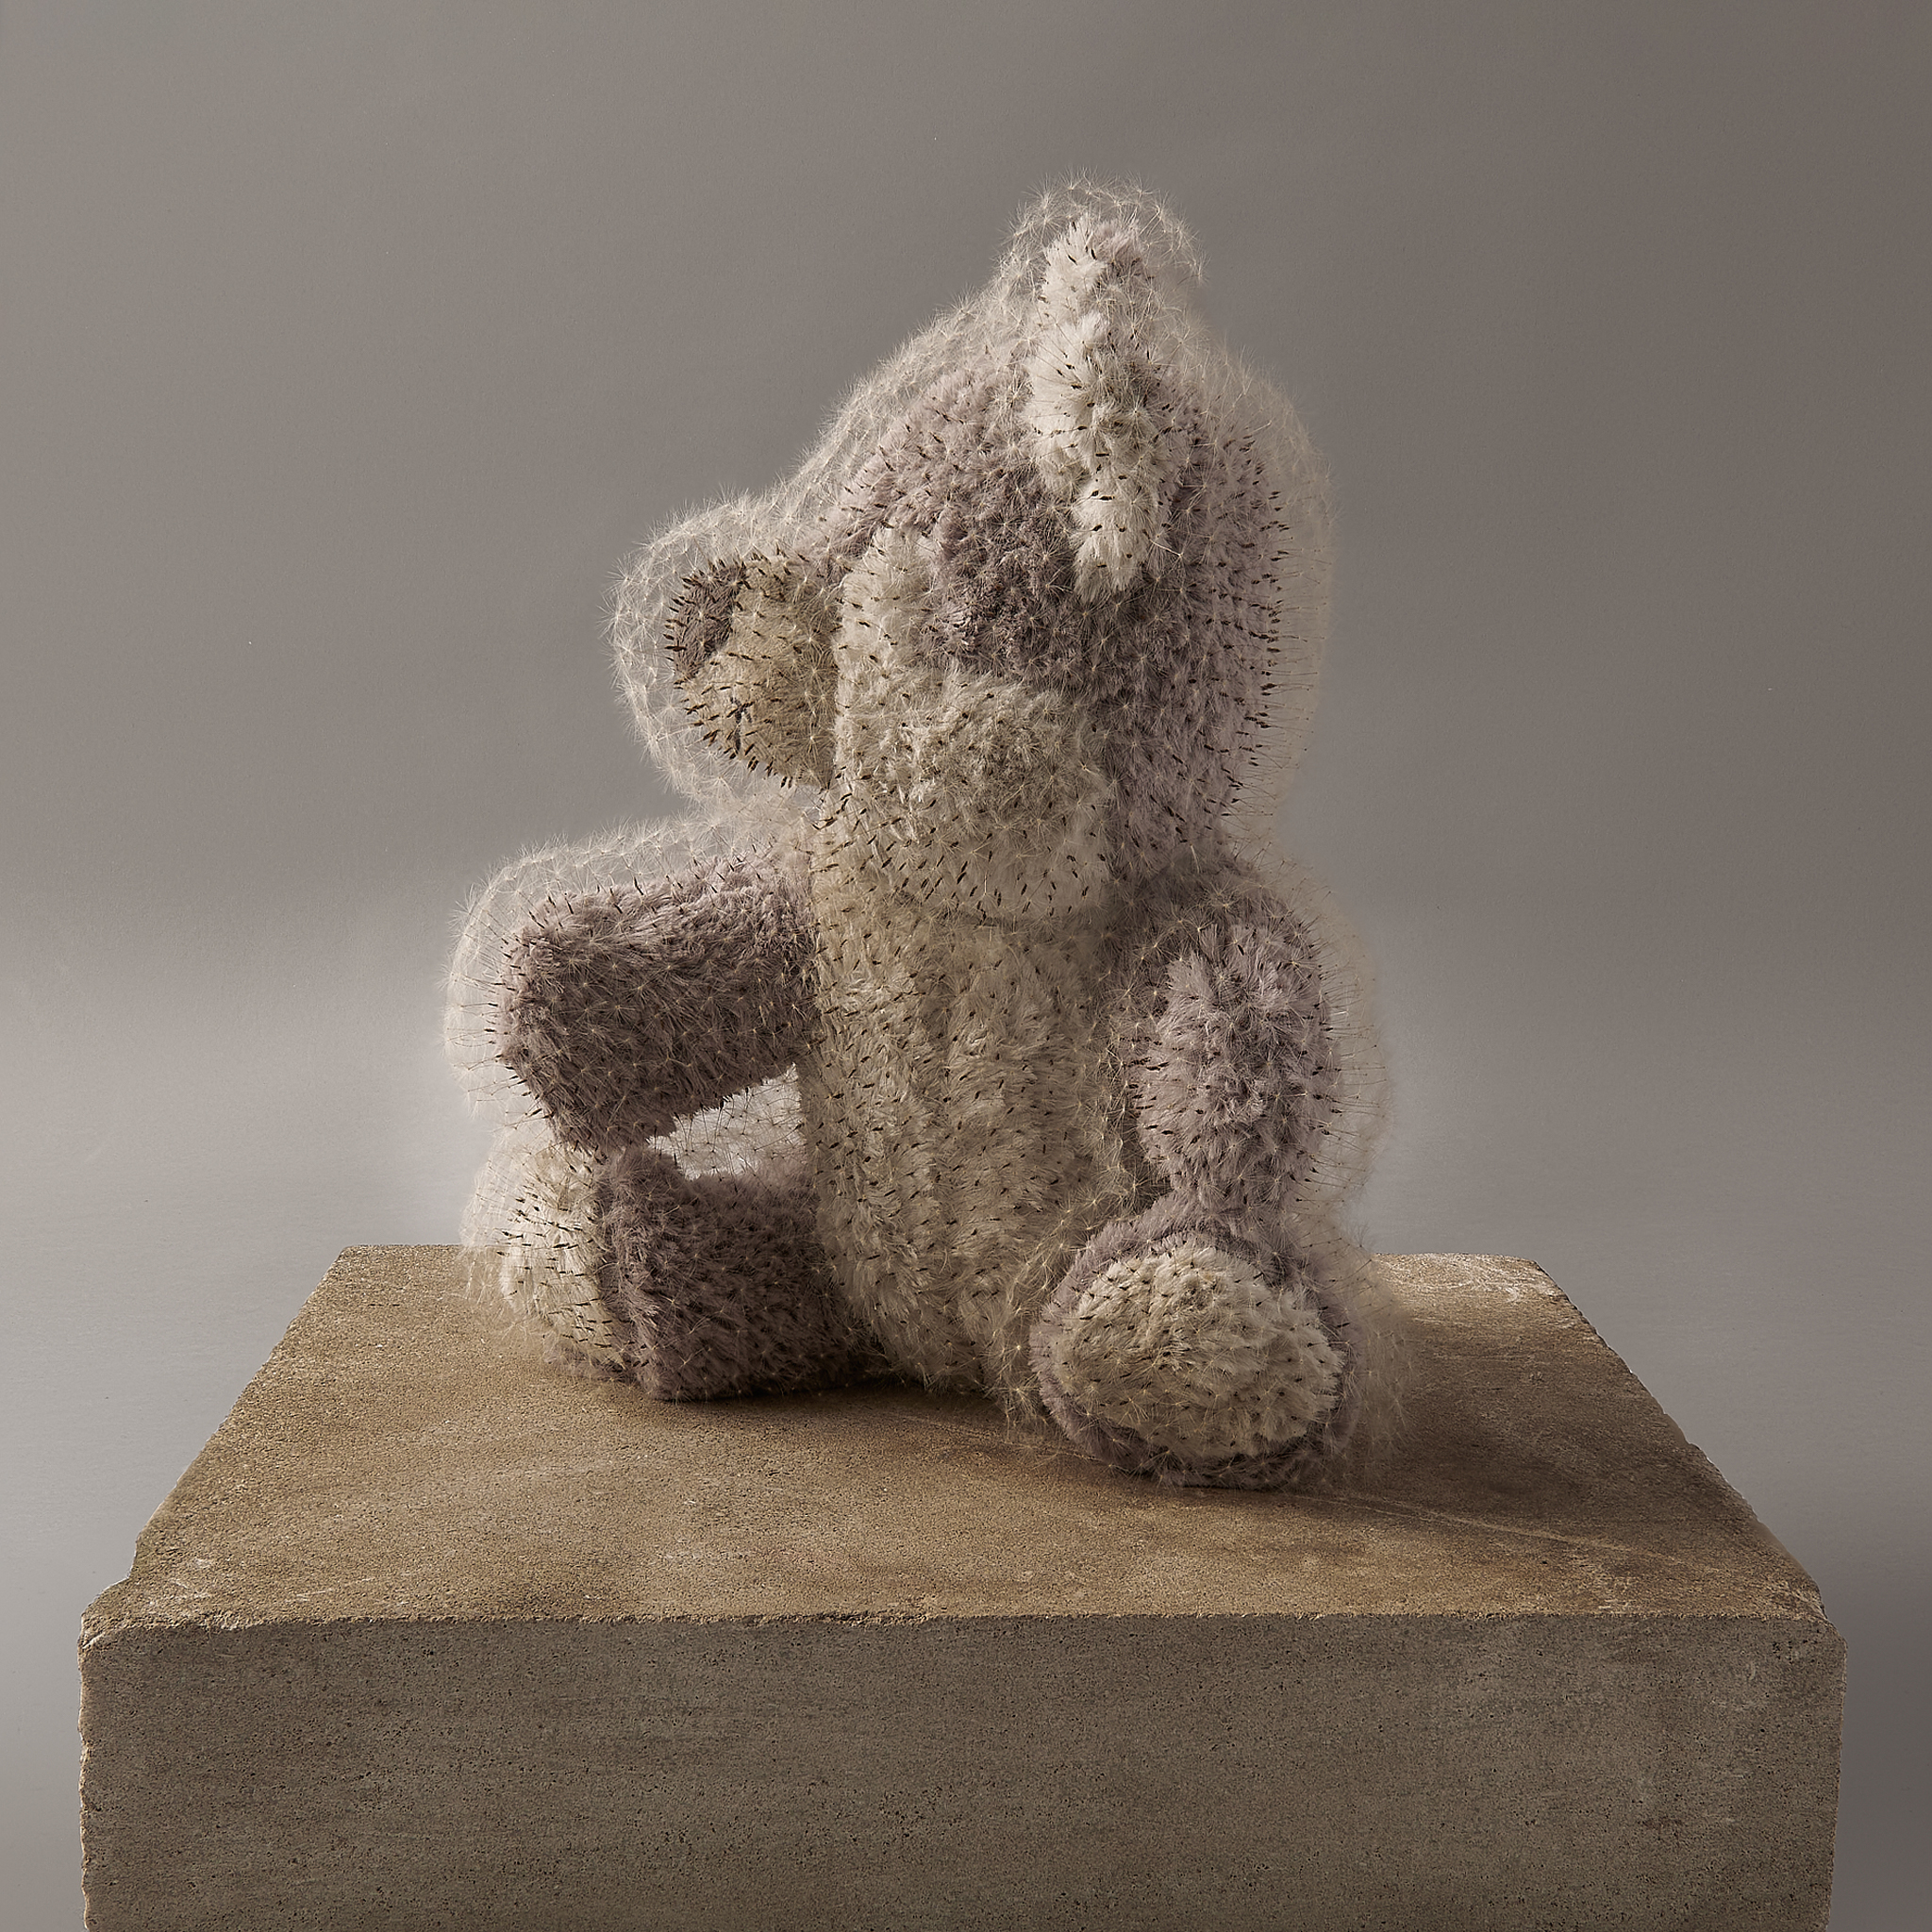 "A Stitch in Time, 2023" - Discarded stuffed animals from children’s graves, wood, and dandelions seeds.